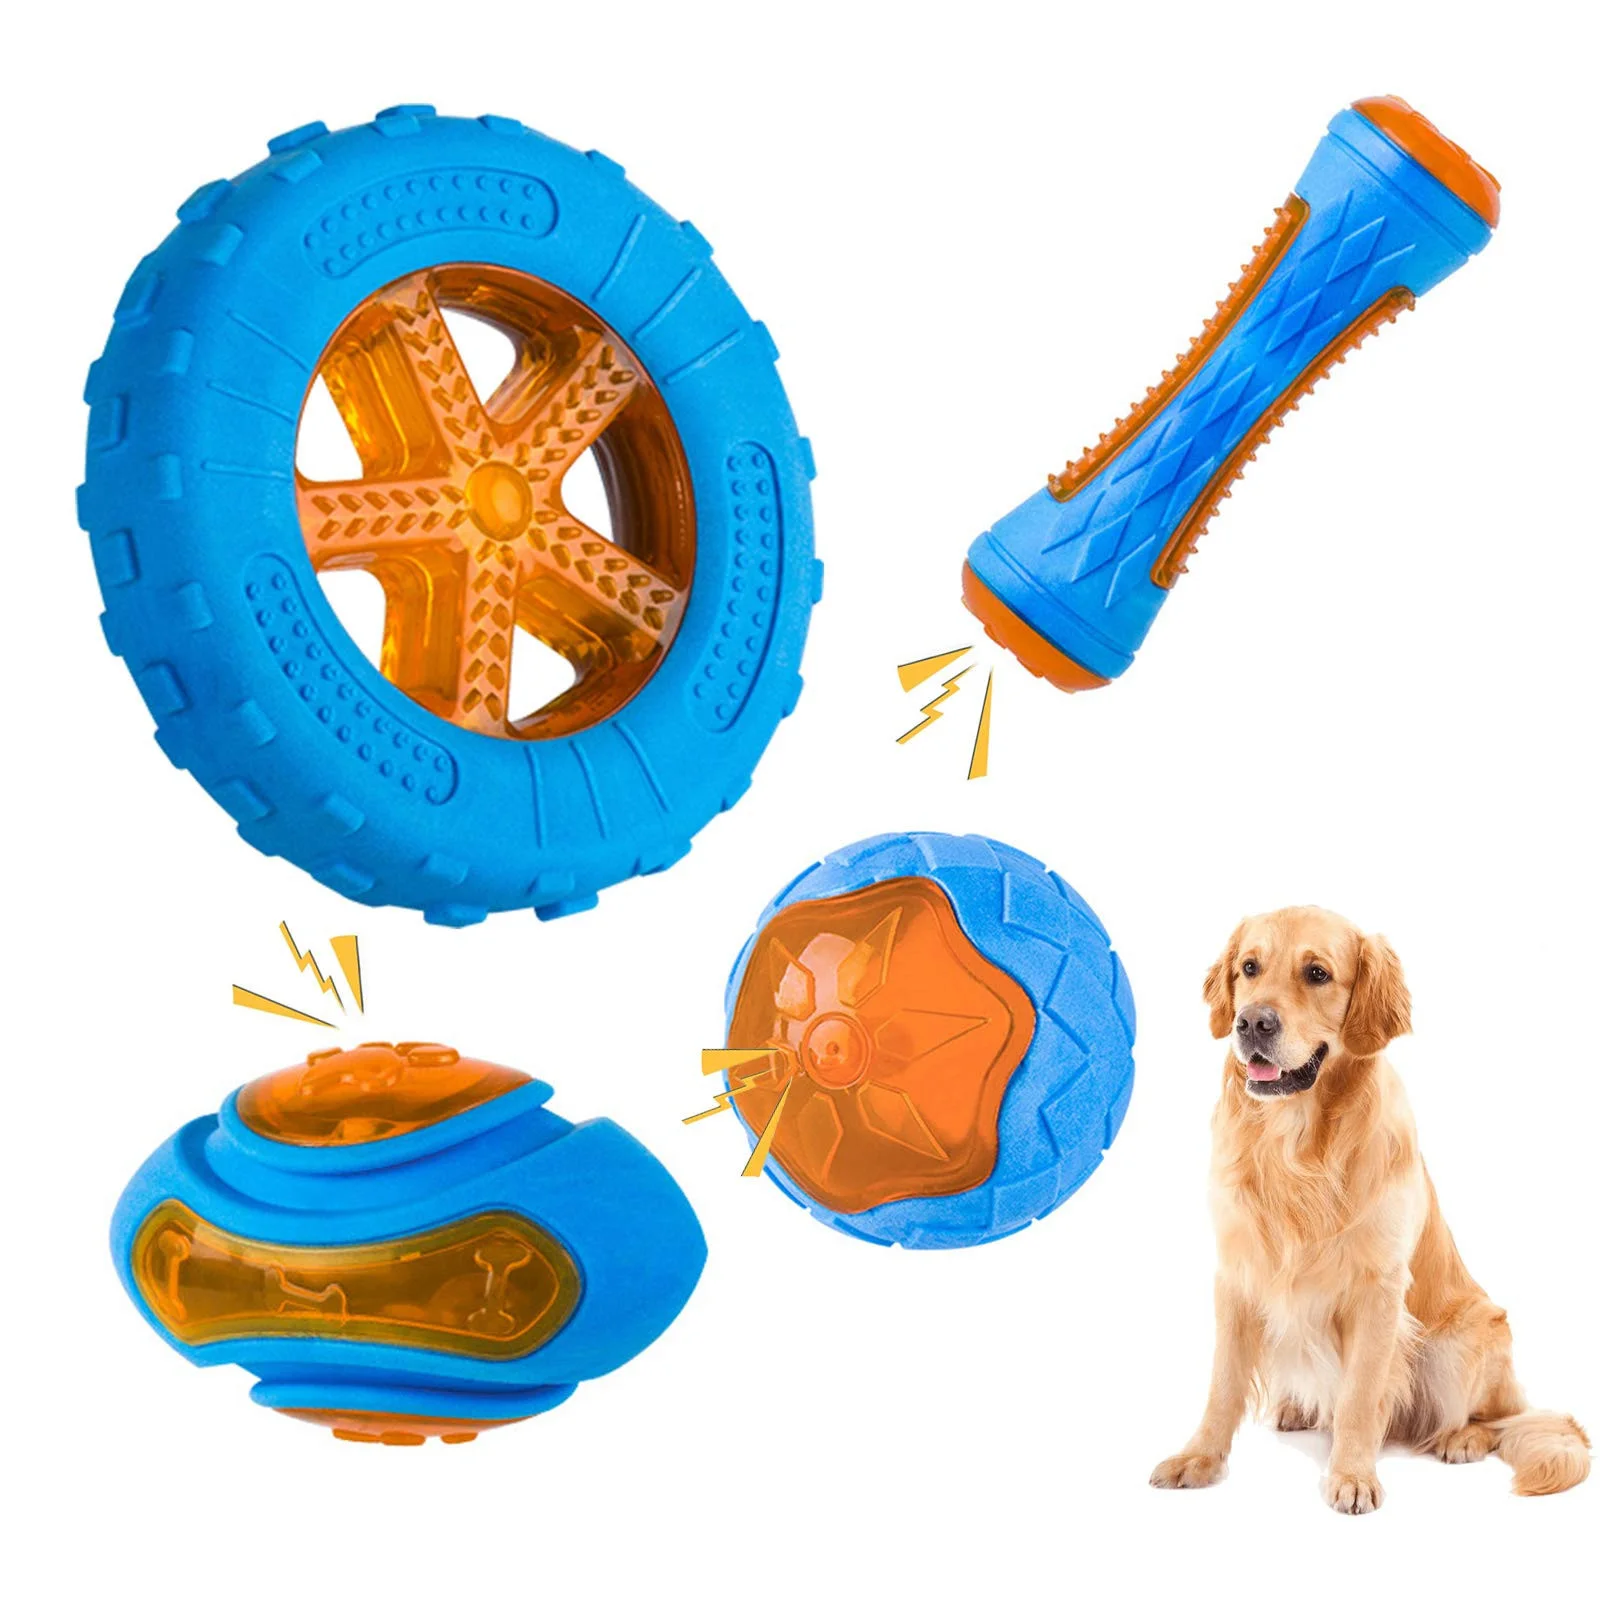 Rubber Toy For Dogs, Interactive Toy For Cleaning Dog Teeth, Resistant To Tightening And Chewing